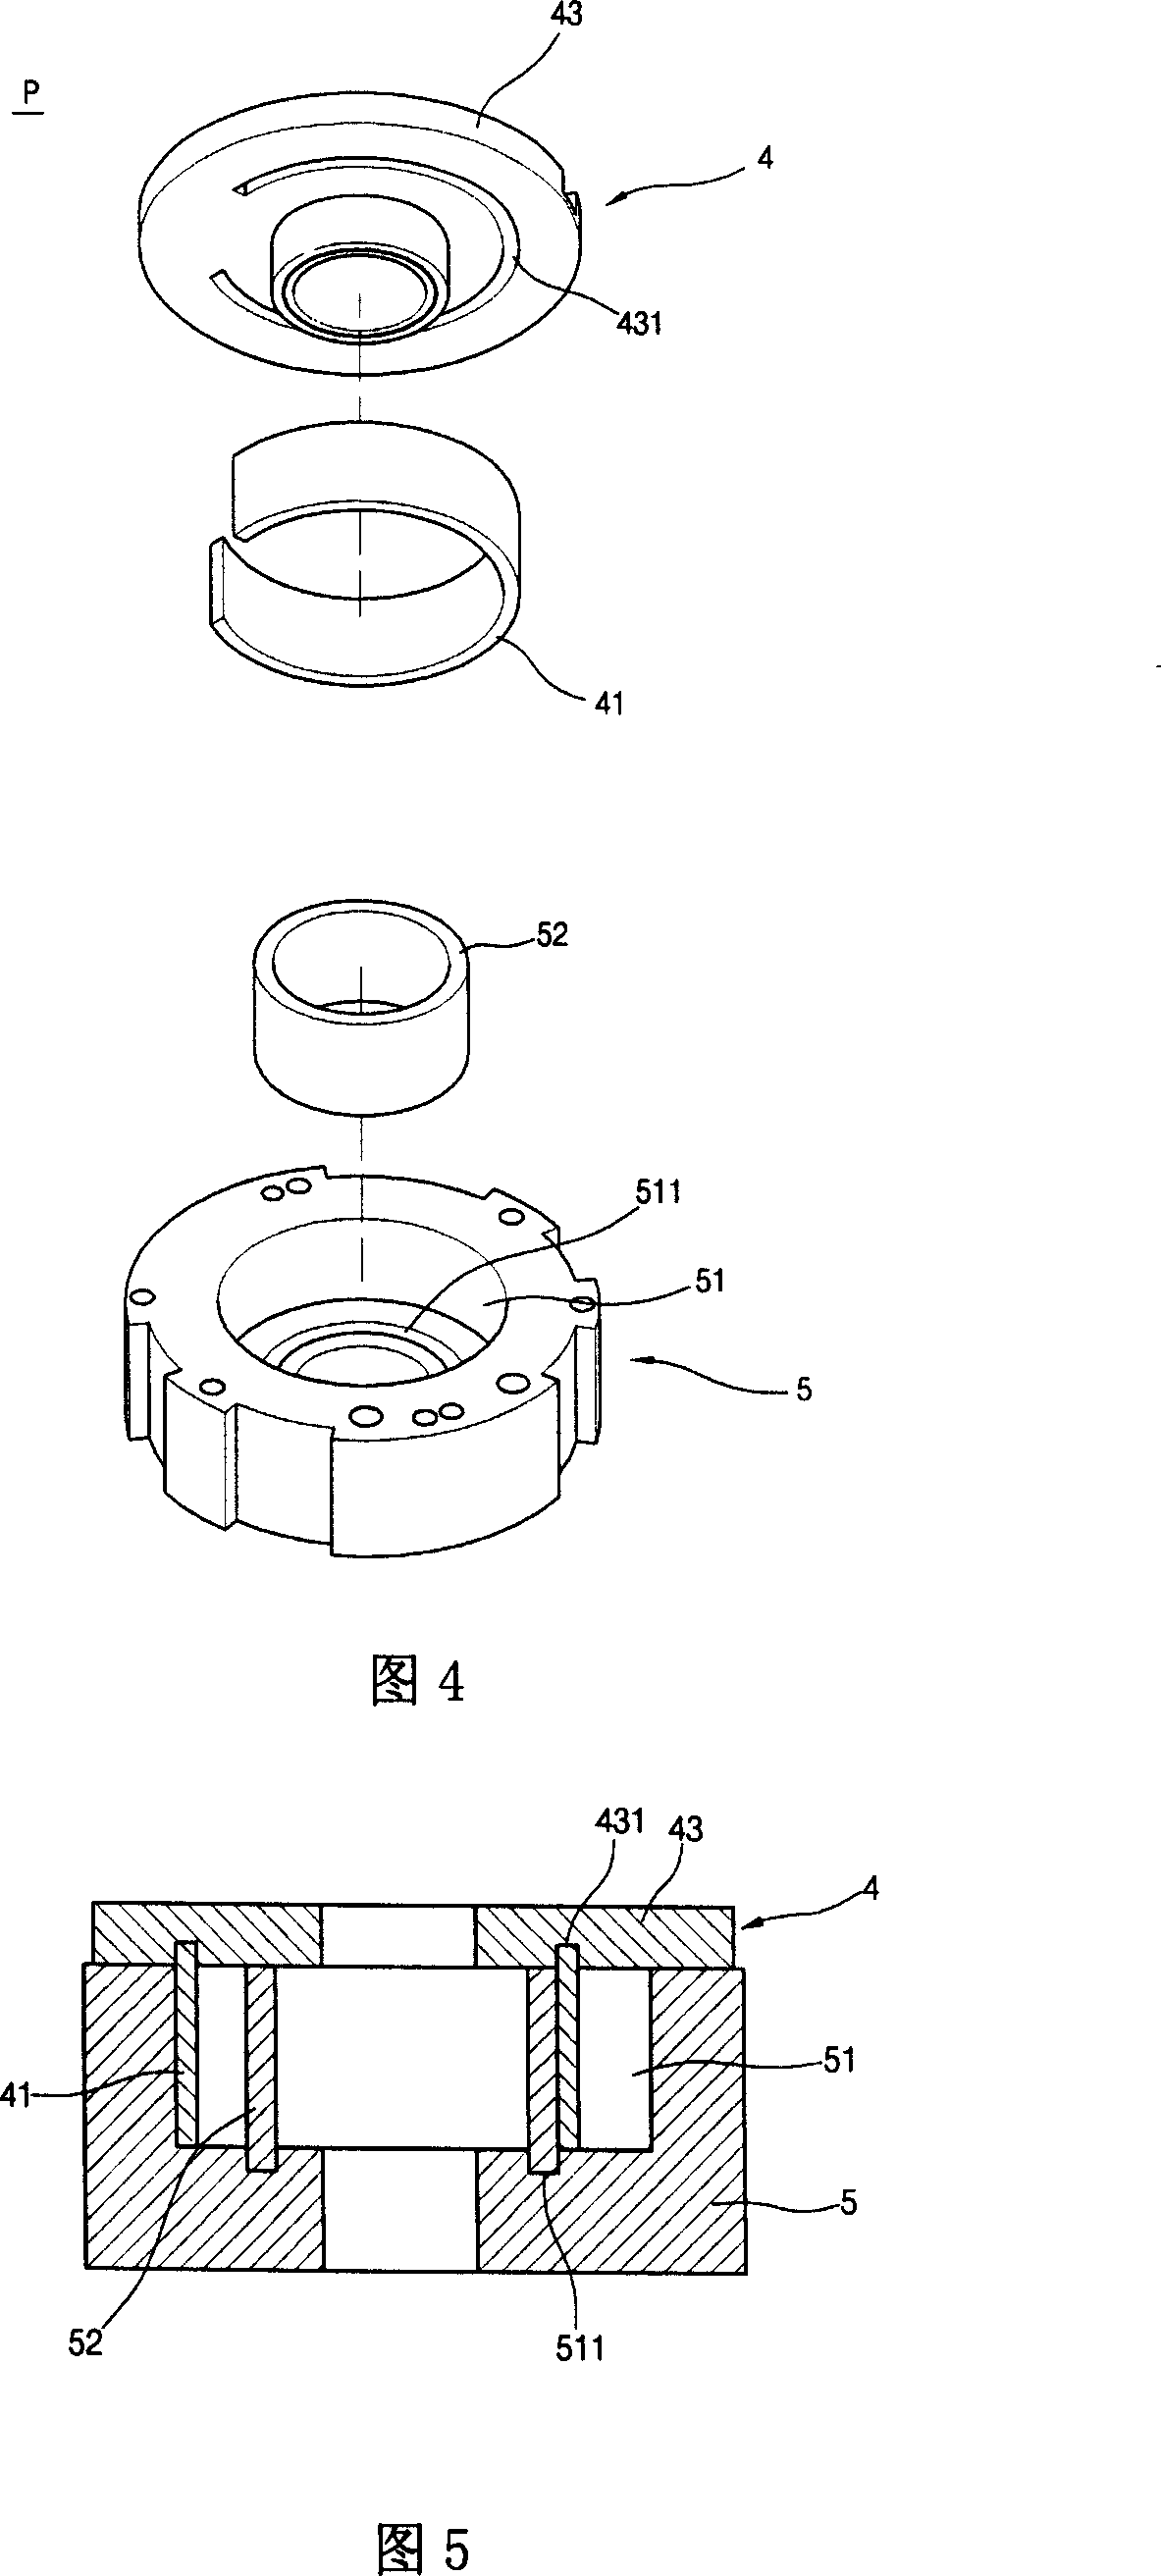 Method for making compression components for rotating blade type compressor